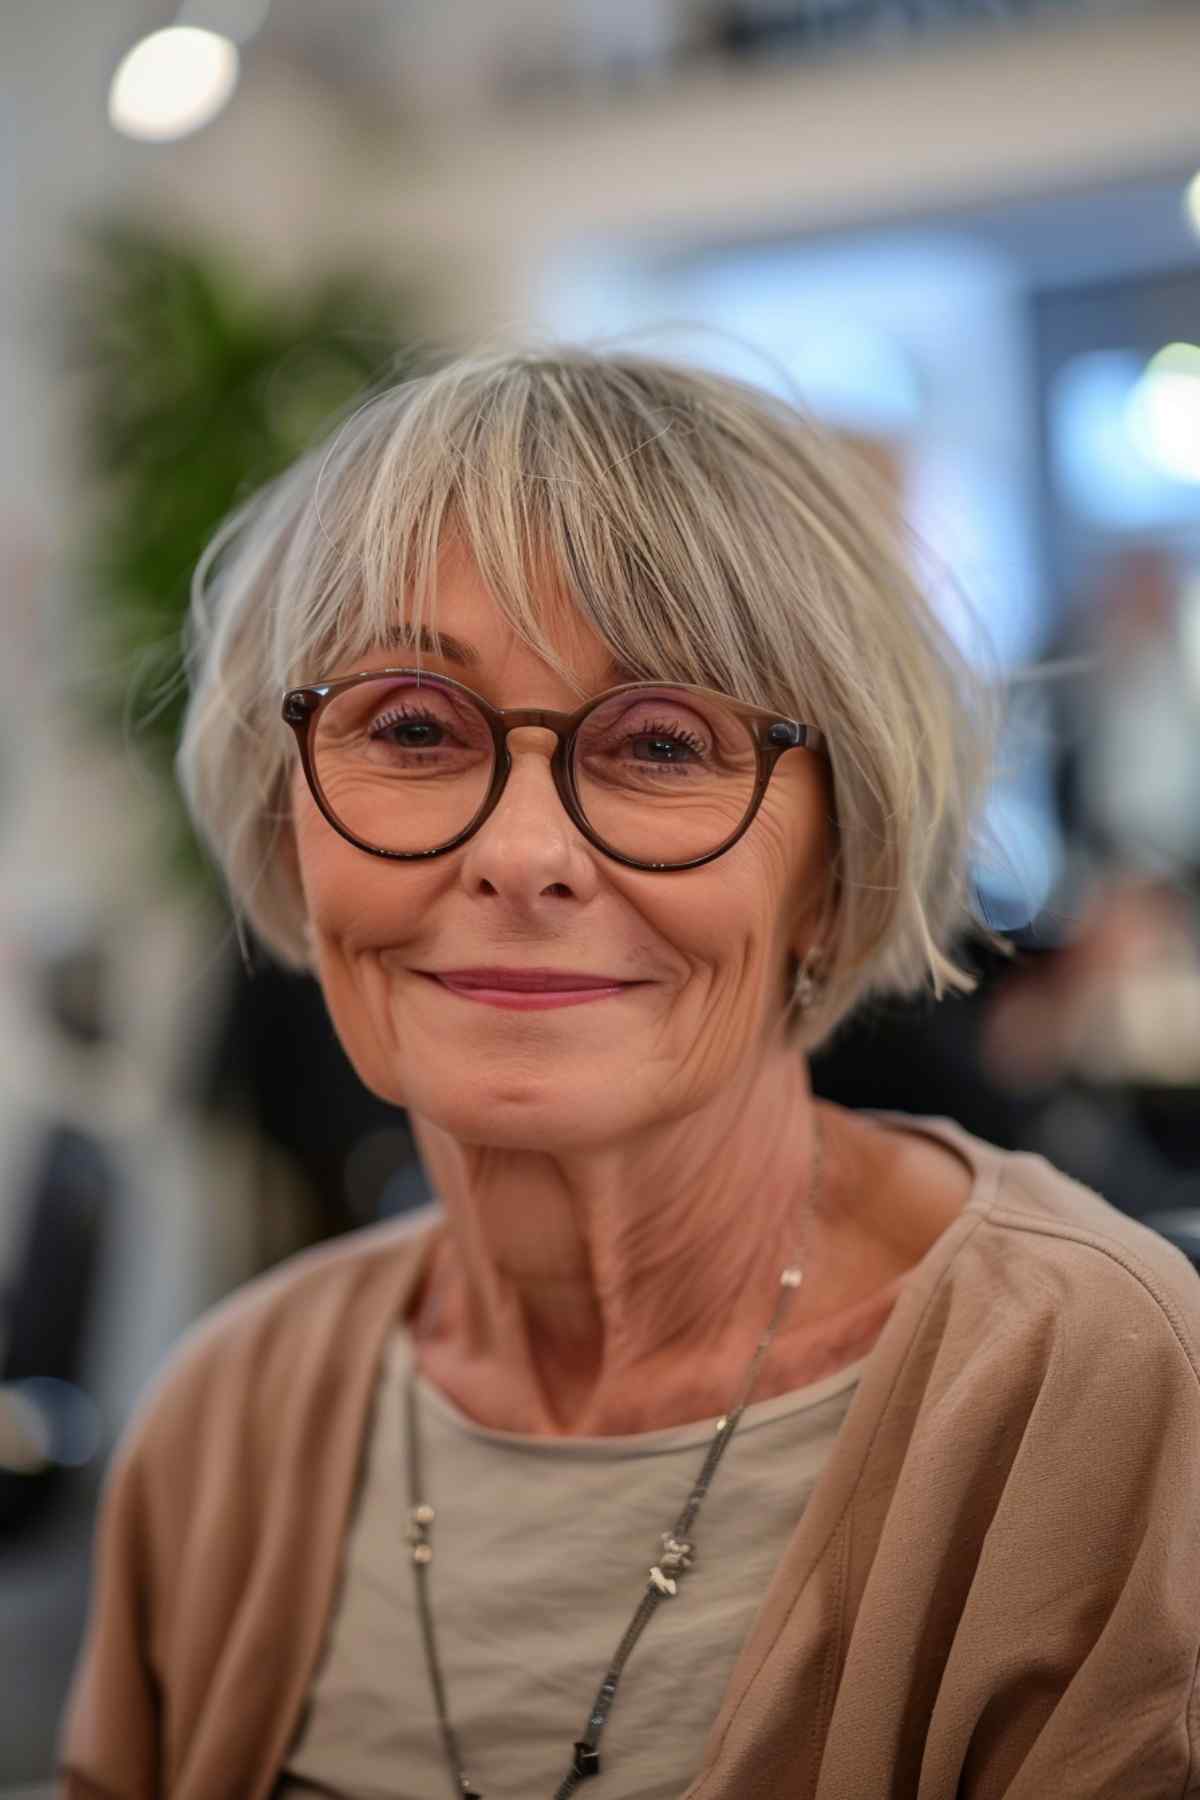 Woman over 70 wearing glasses, with a feathered haircut that offers a graceful and stylish appearance.